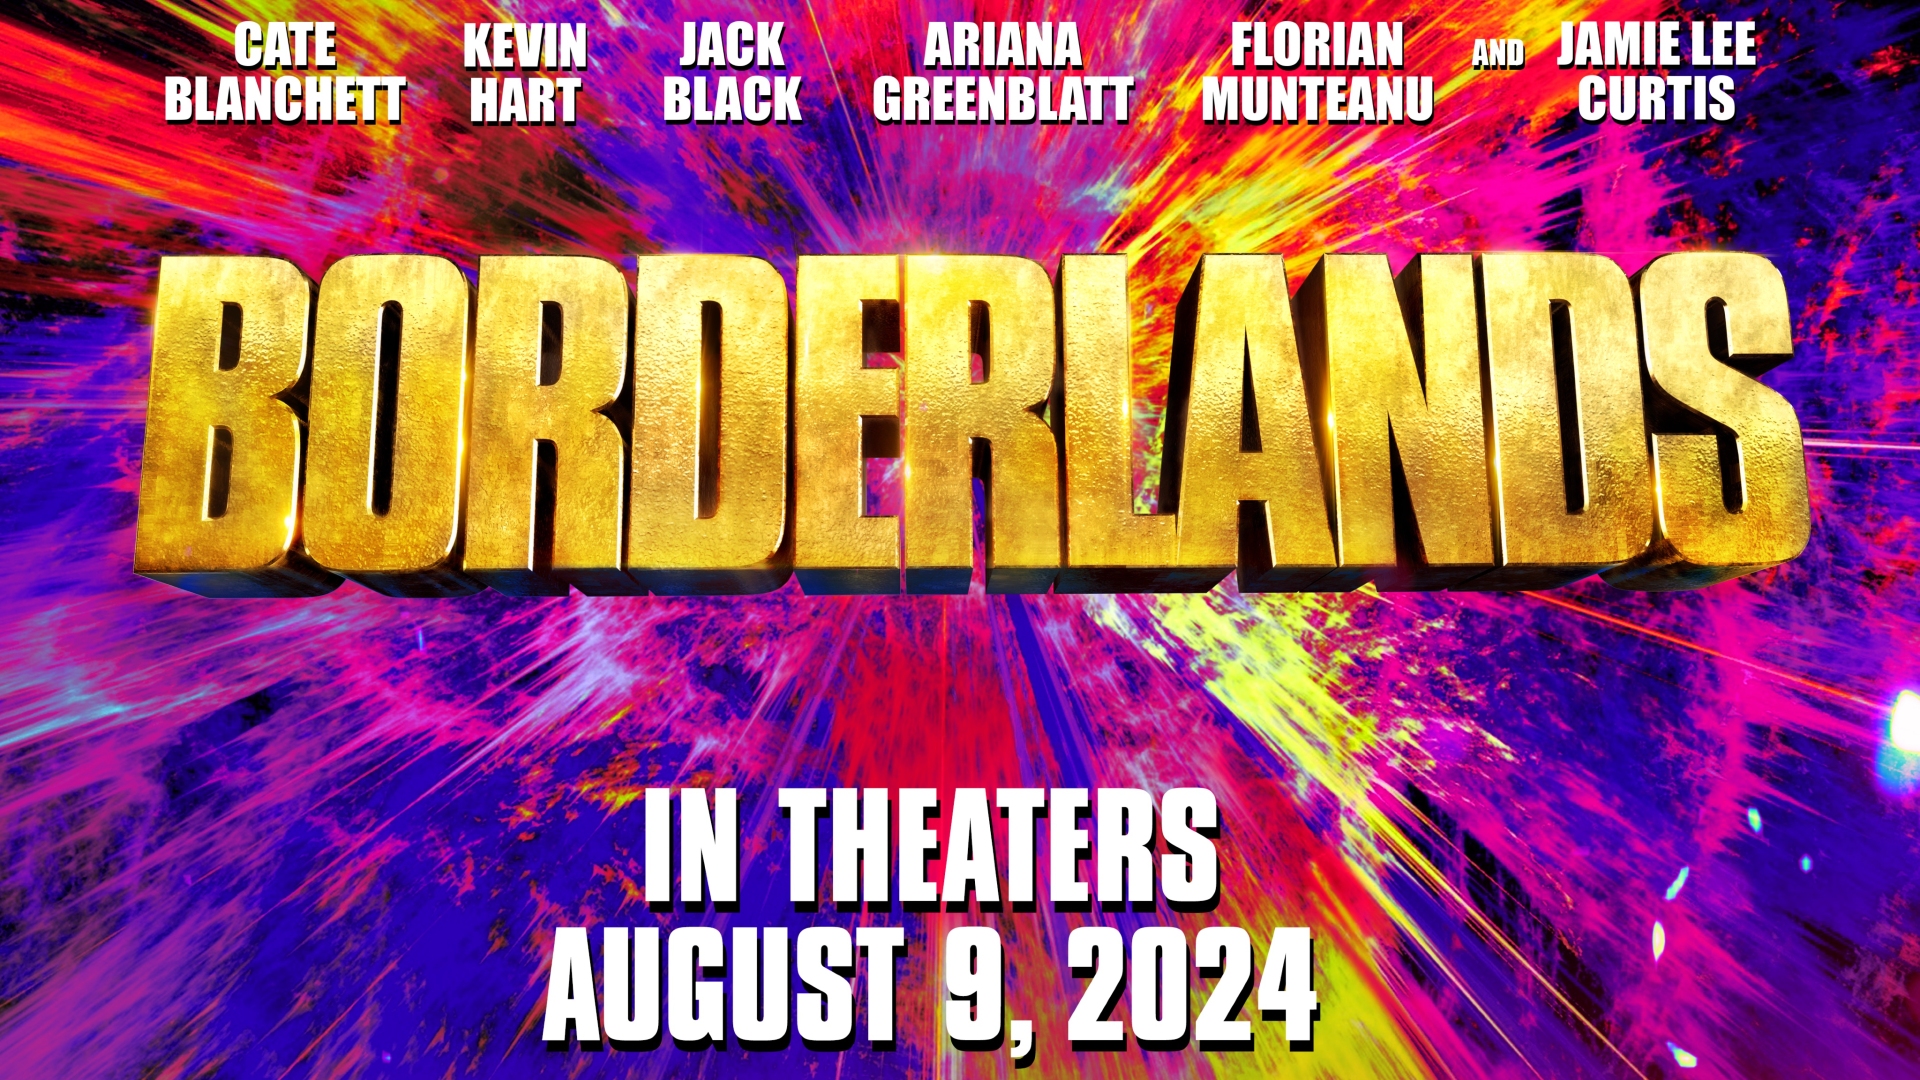 A Borderlands poster showing the film's release date and cast